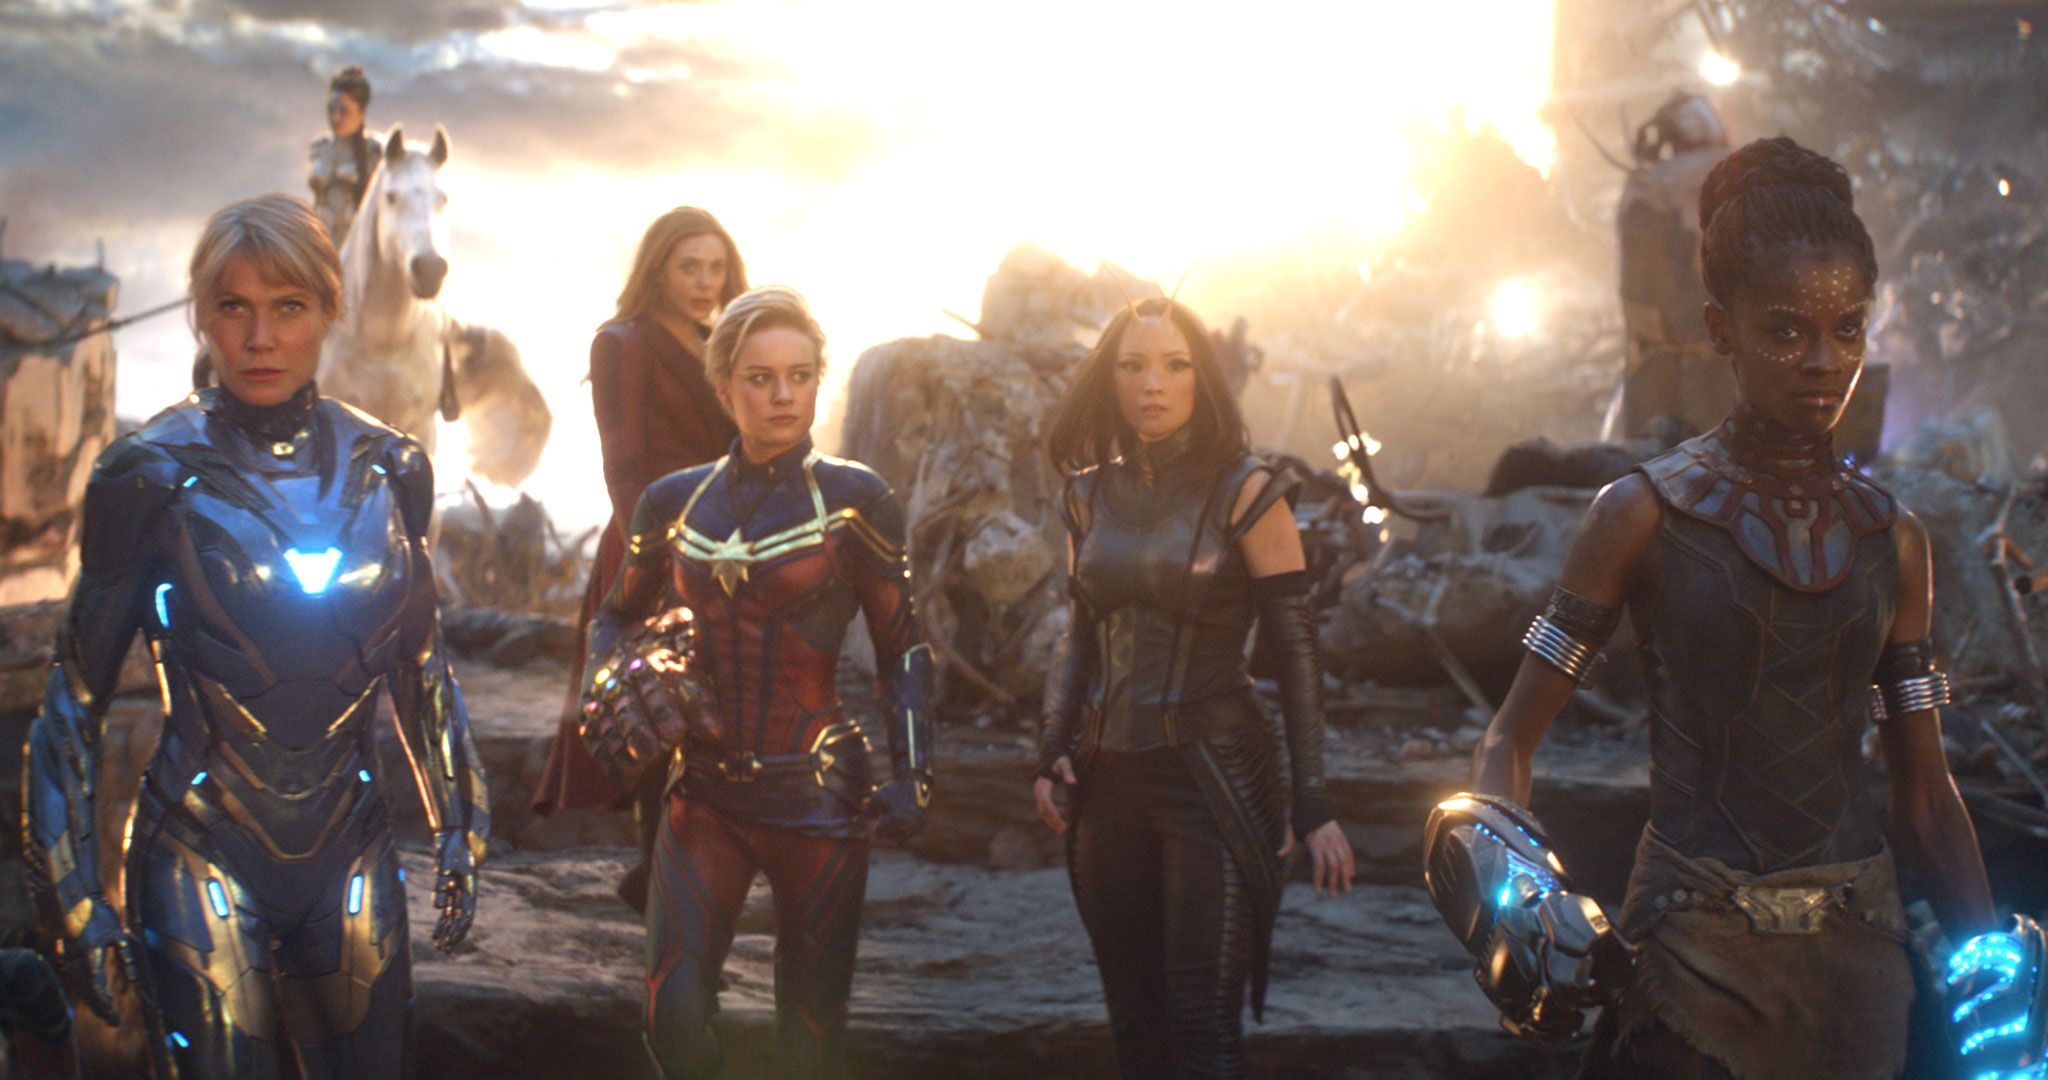 Avengers: Endgame Women Reflect On *that* A Force Moment